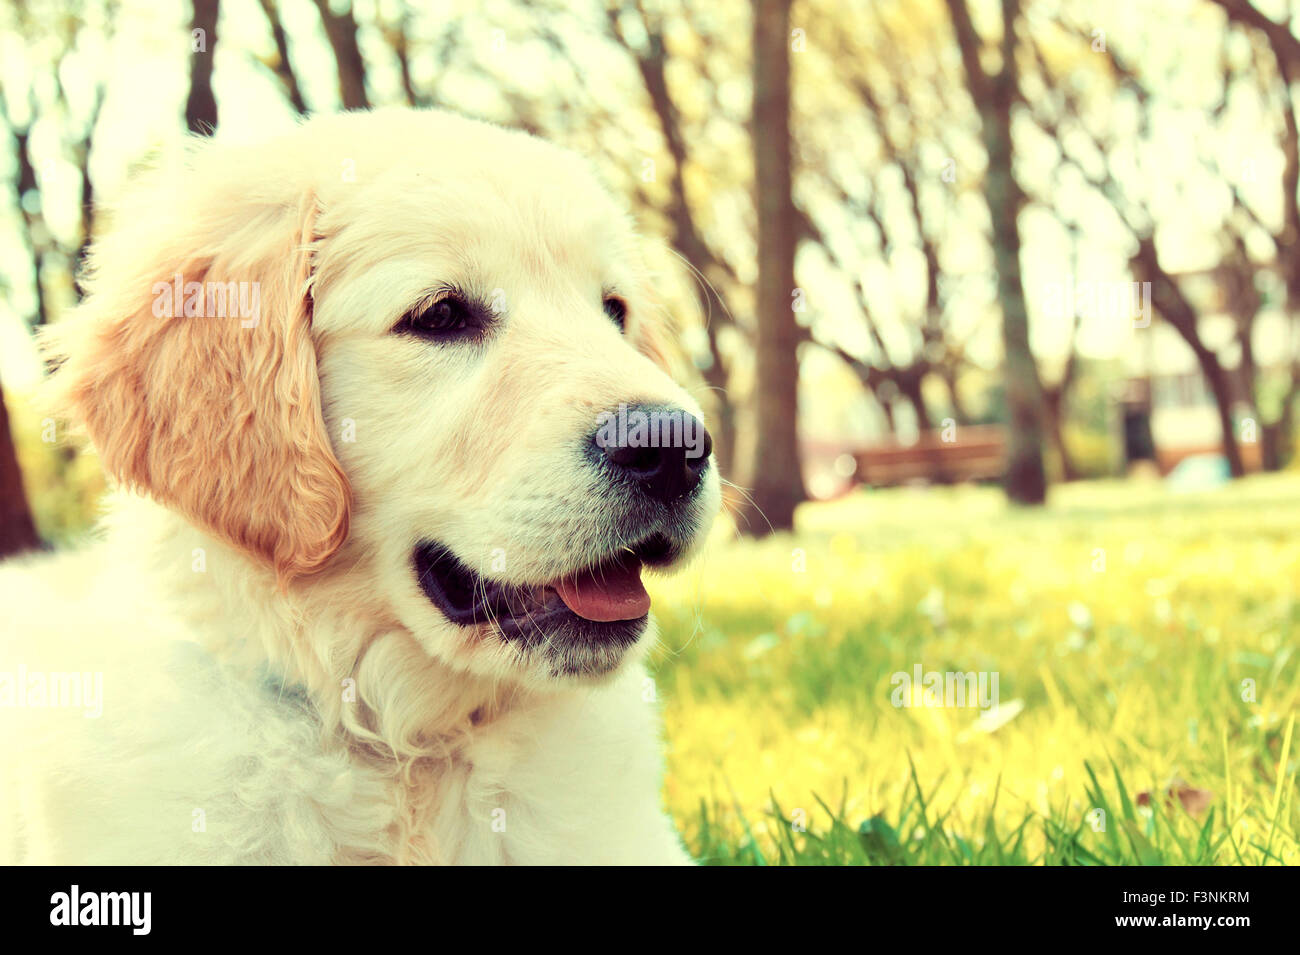 Cute golden retriever puppy in the park at summer. Vintage instagram picture. Stock Photo